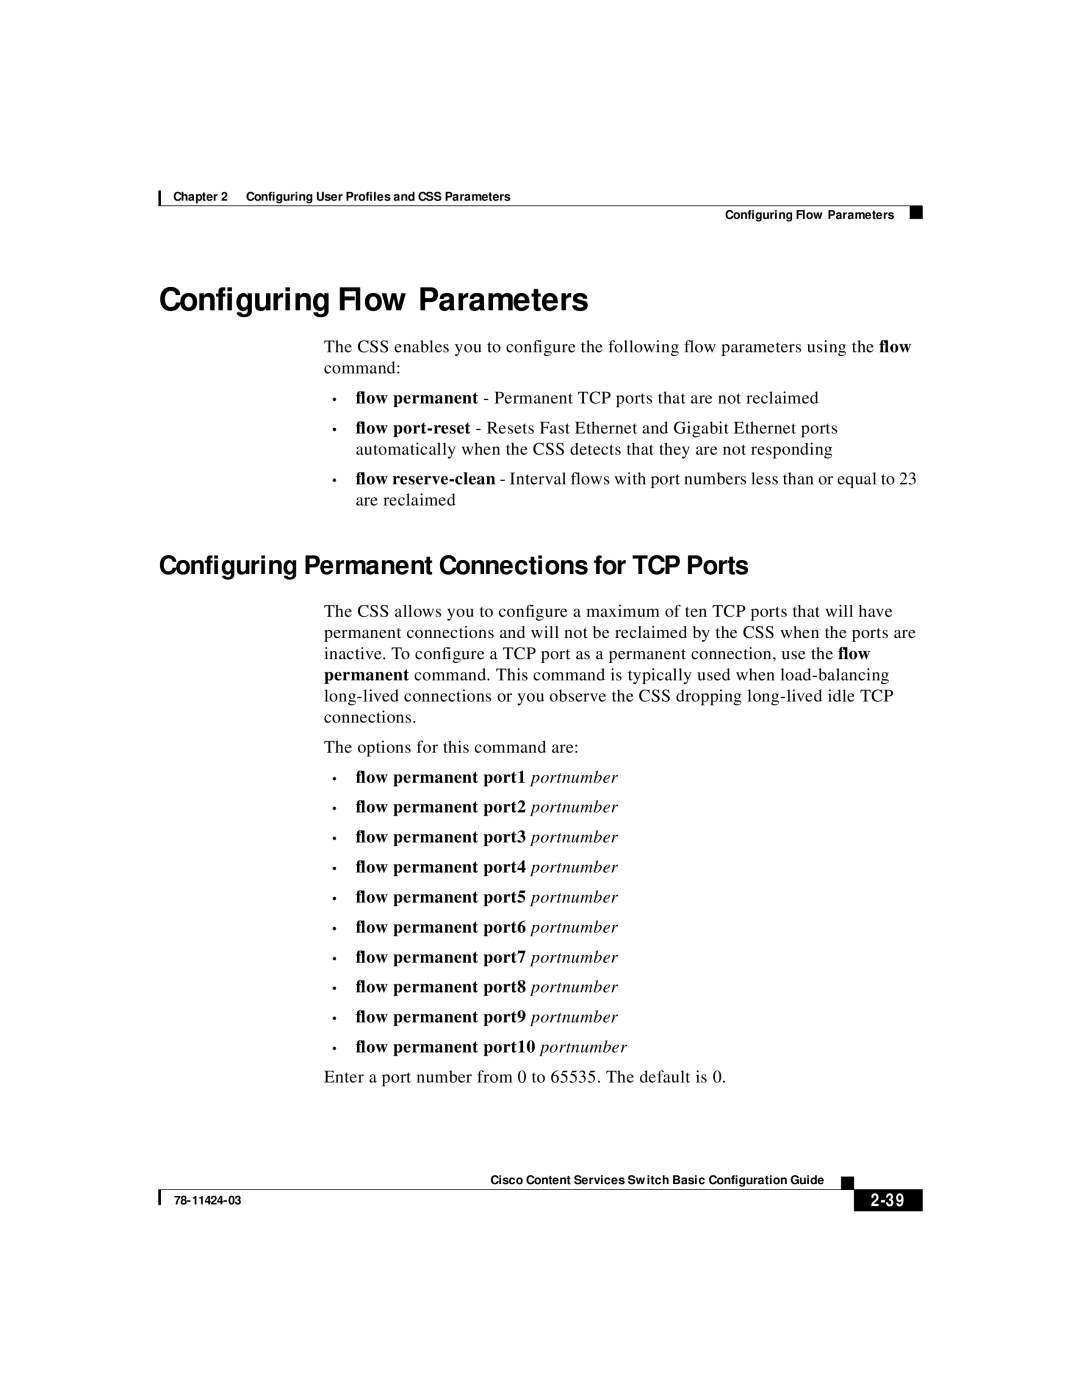 Cisco Systems 78-11424-03 manual Configuring Flow Parameters, Configuring Permanent Connections for TCP Ports, 2-39 